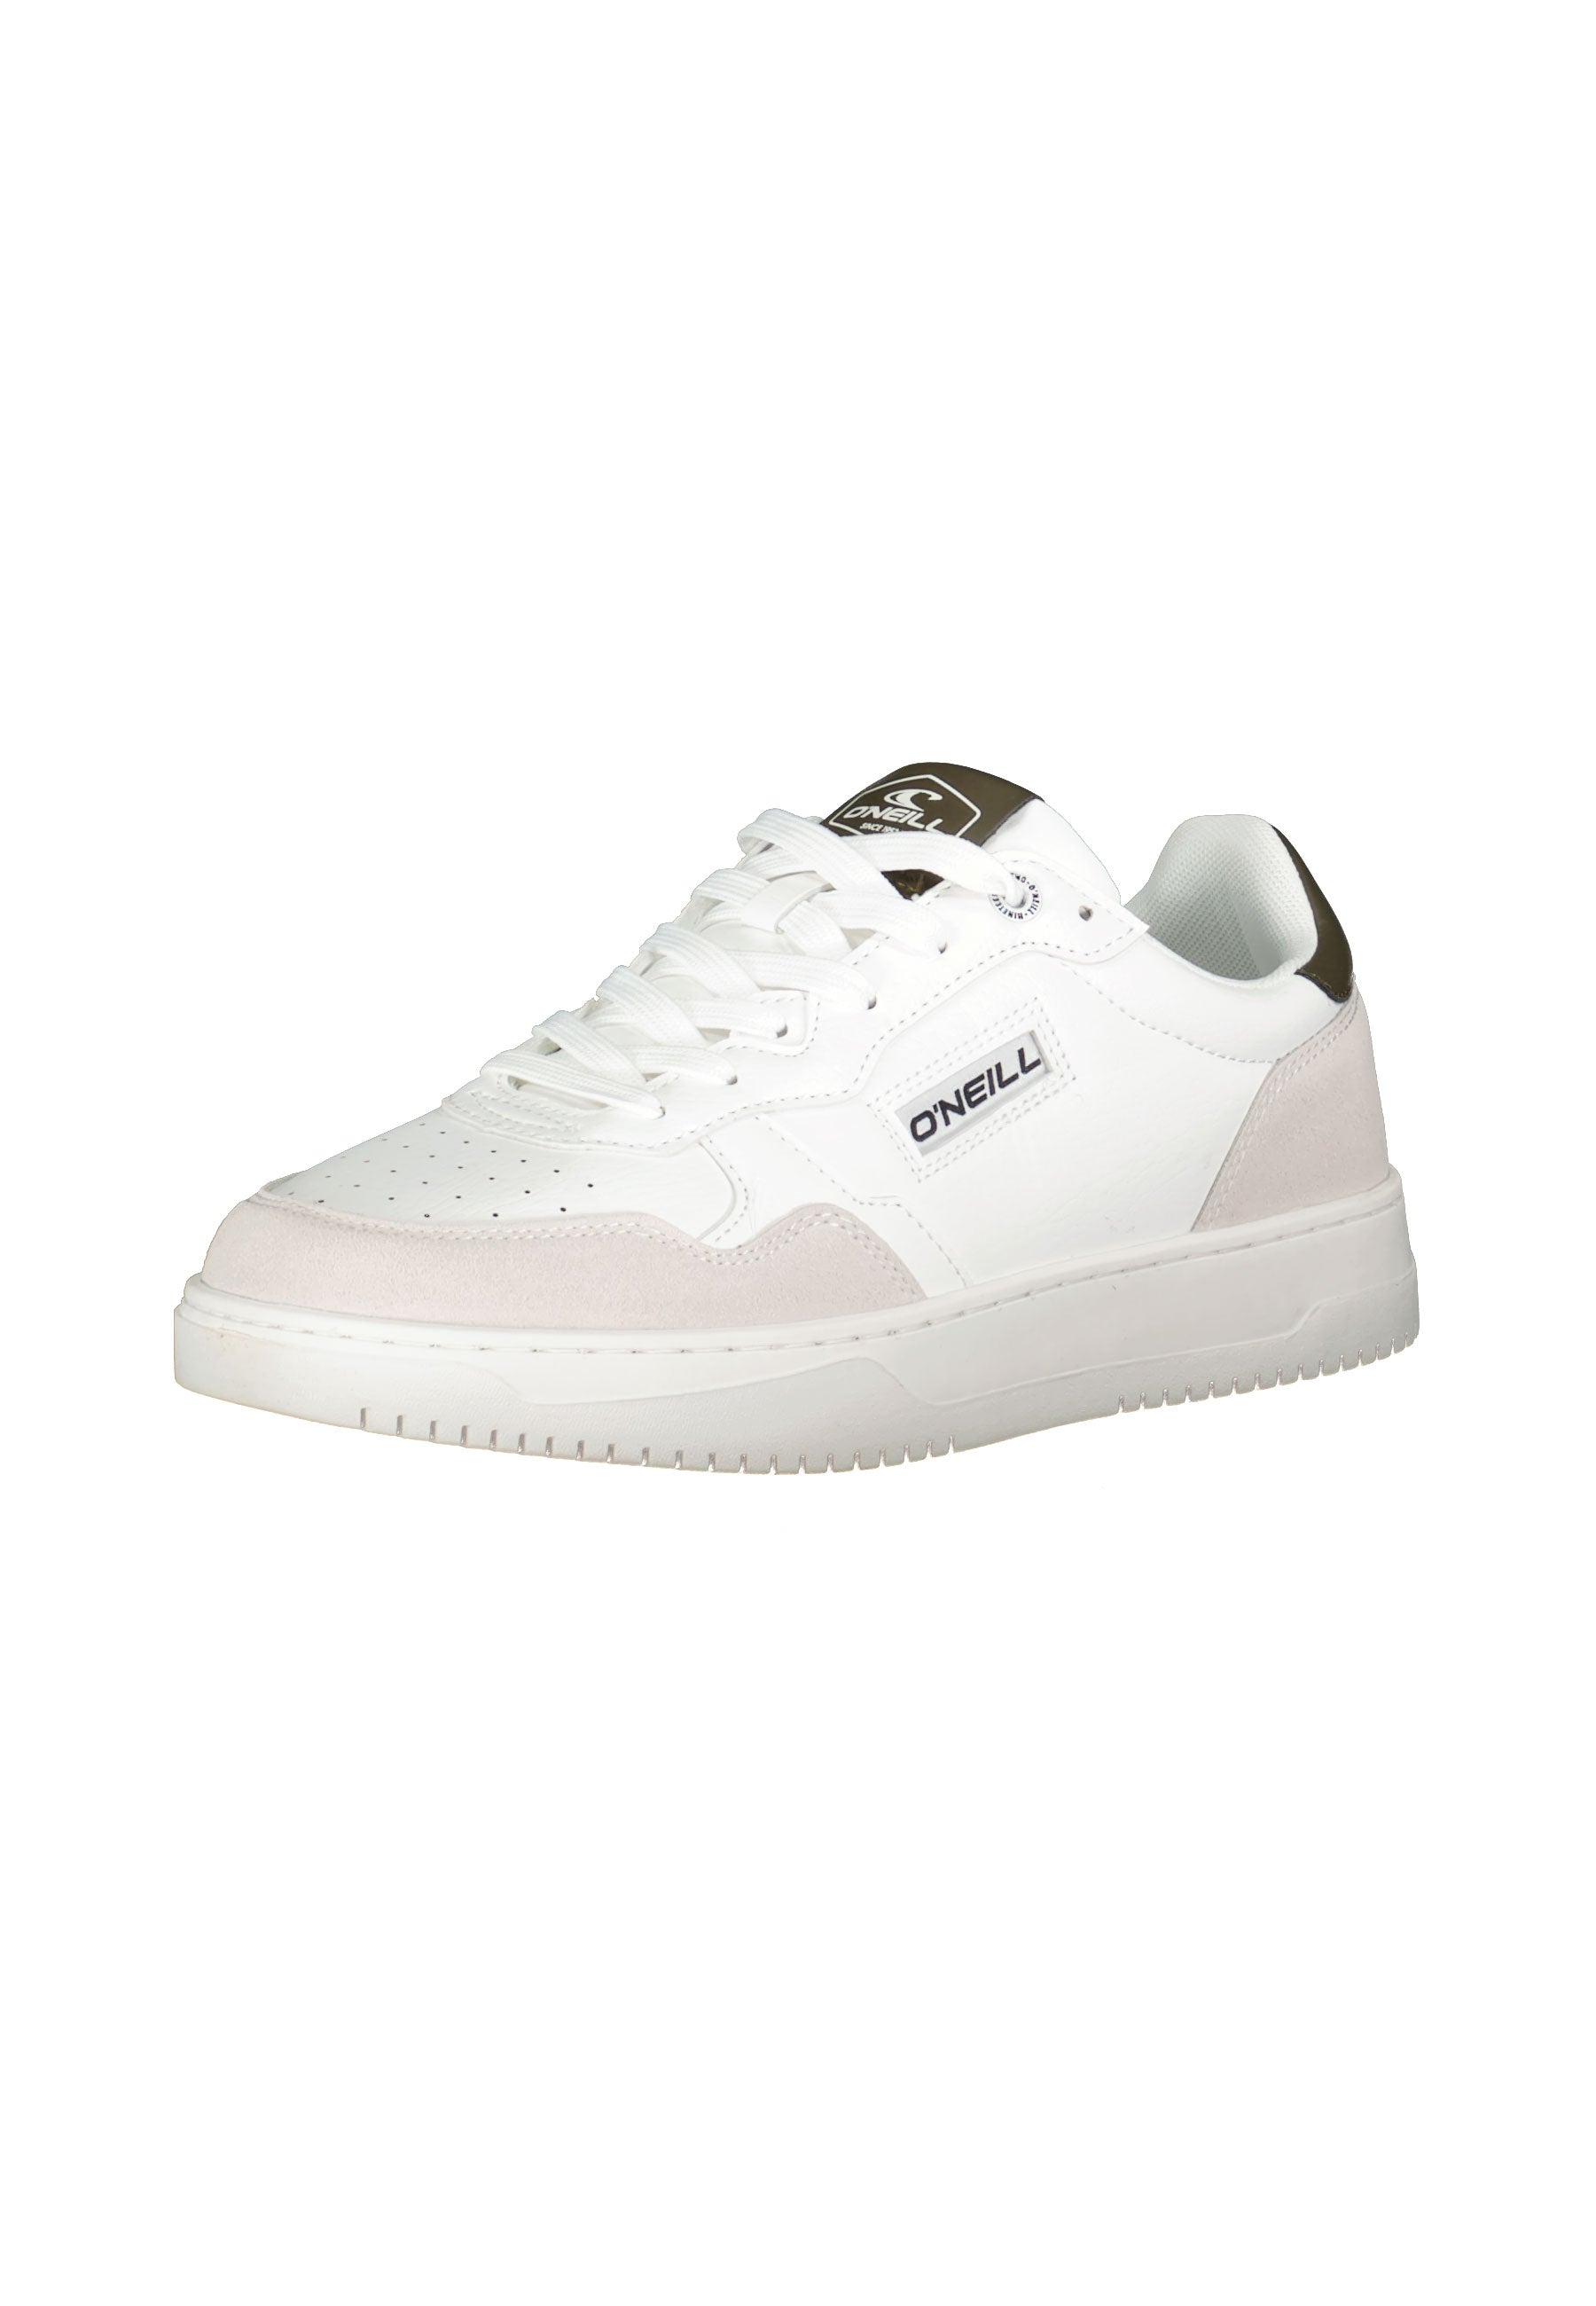 Galveston Low in Bright White/ Olive Sneakers O'Neill   